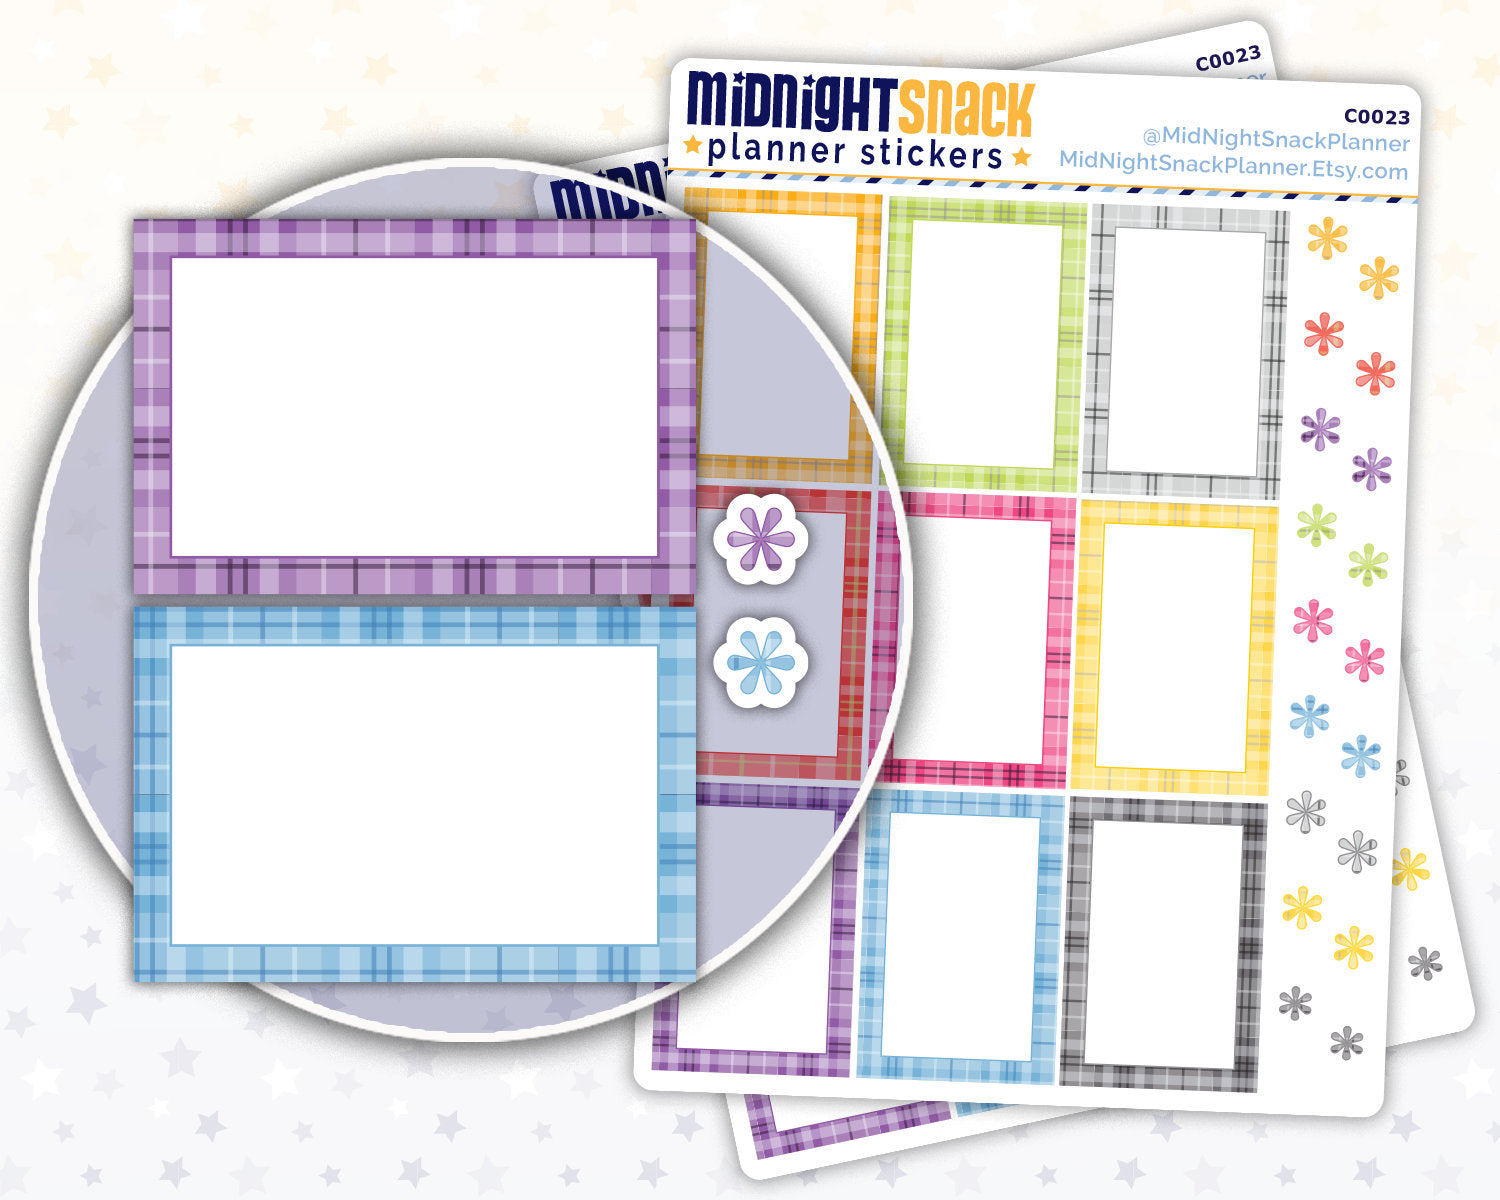 Plaid Multi-Colored Half Boxes with Bonus Asterisk Planner Stickers Midnight Snack Planner